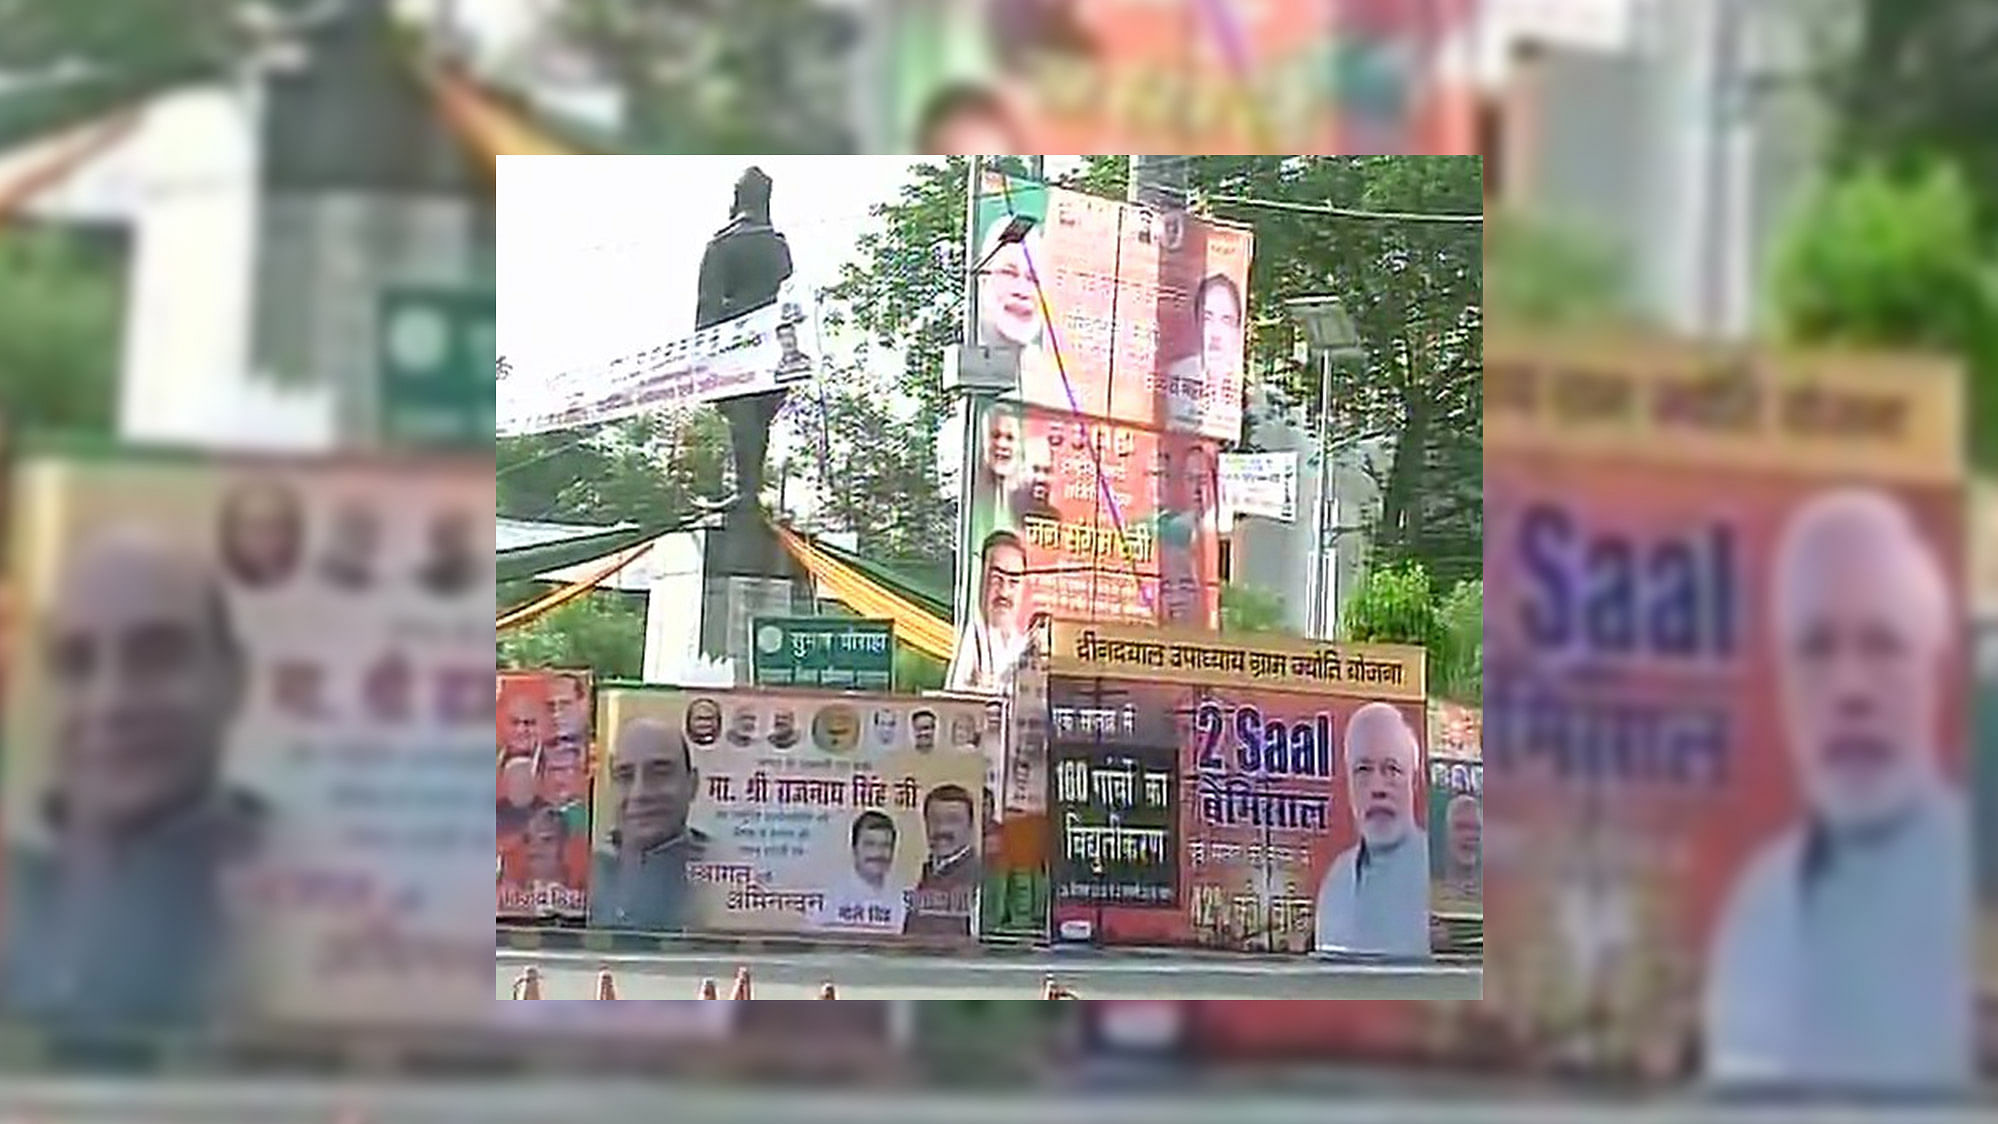  BJP posters seen all across Allahabad city ahead of party’s two-day National Executive meeting which begins on Sunday. (Photo Courtesy: <a href="https://twitter.com/ANINewsUP?ref_src=twsrc%5Etfw">twitter.com/</a>ANINews)